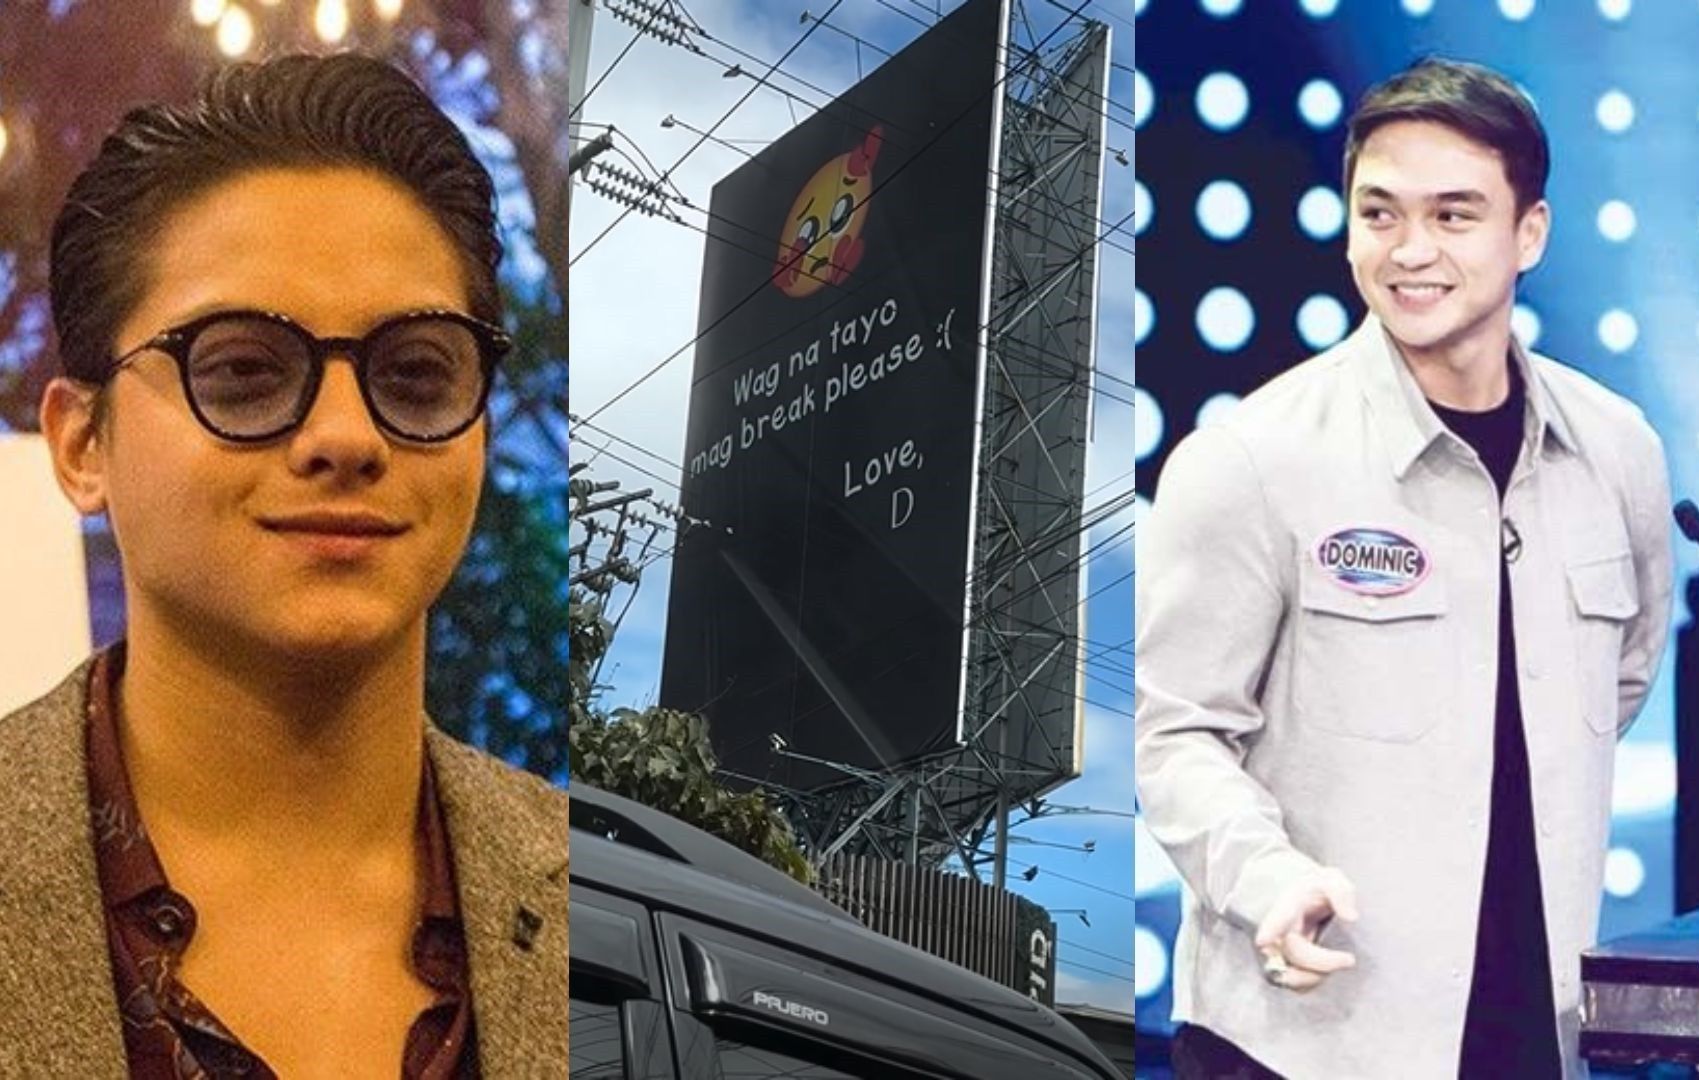 Dominic Roque? Daniel Padilla? Billboard by 'D' asking not to break up goes viral